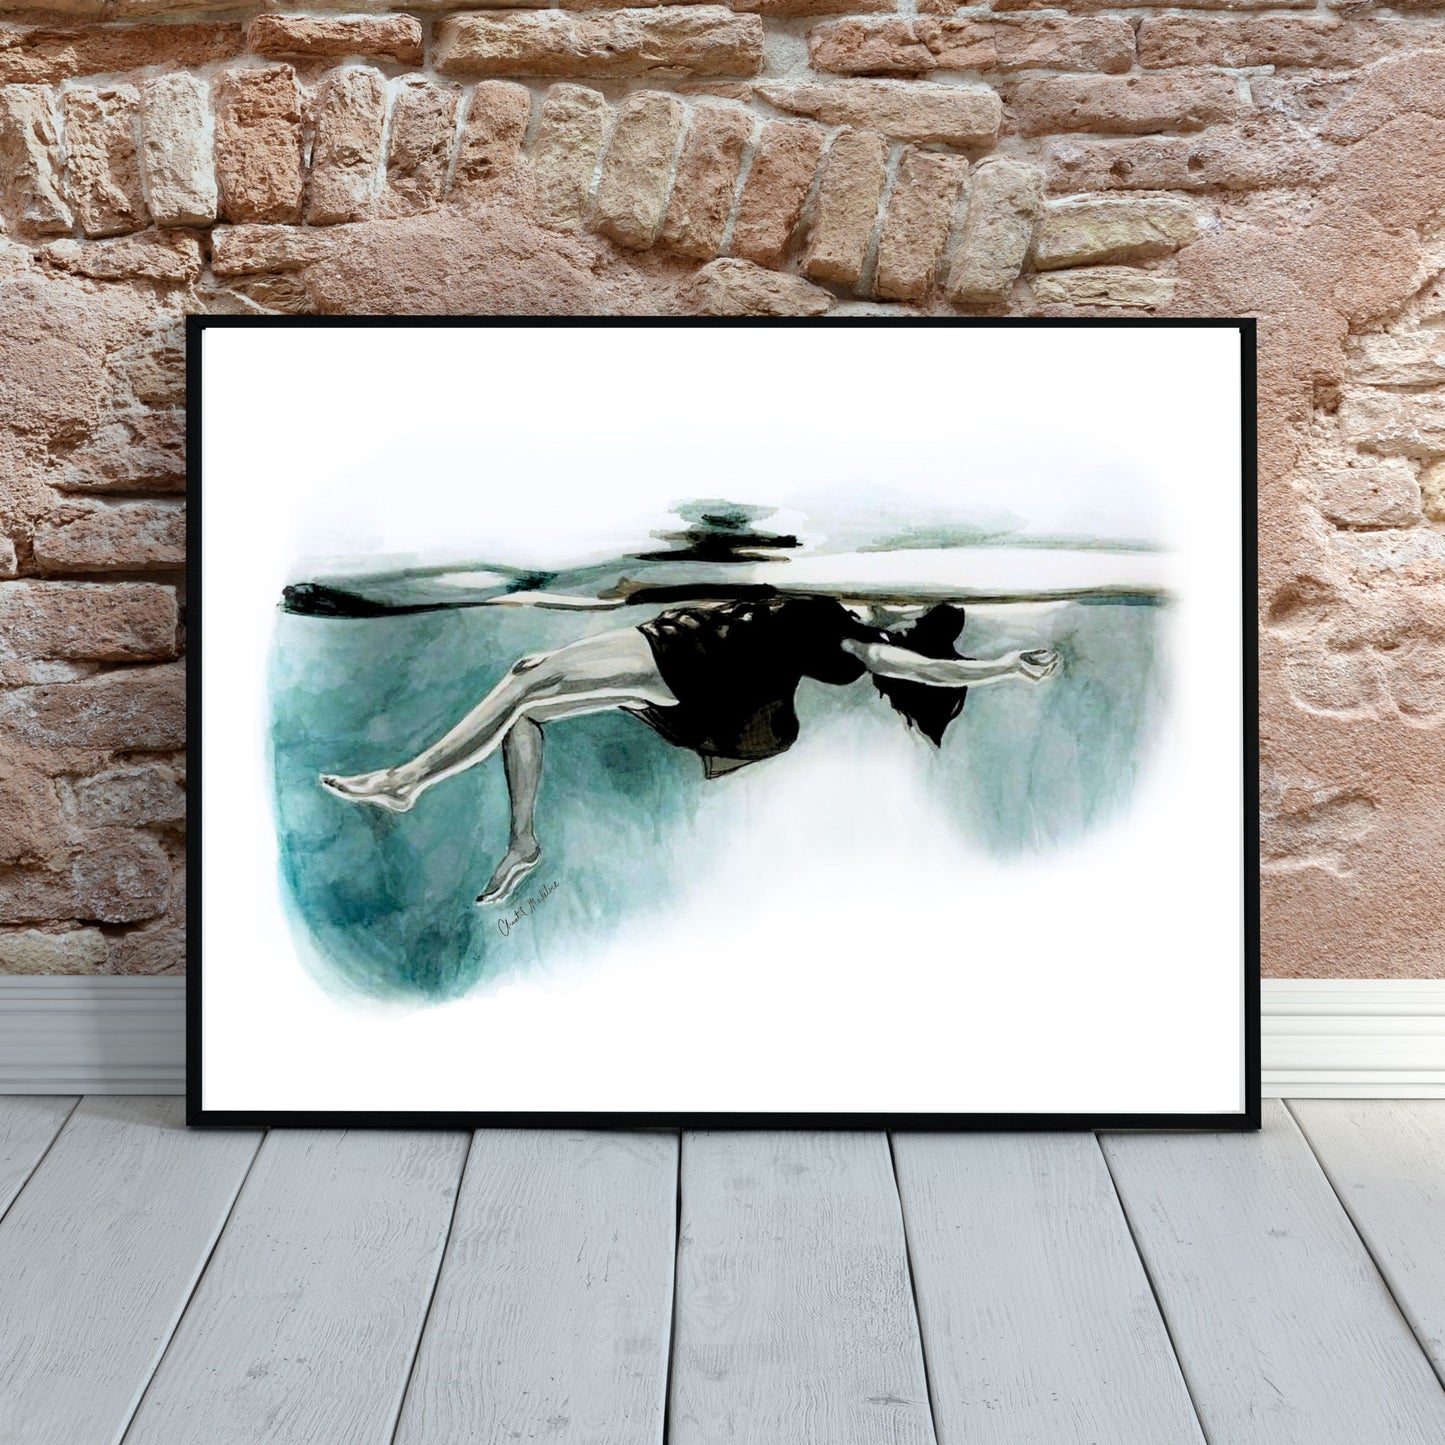 Floating, Woman floating art print, Grief series art, Giclee print on fine art paper